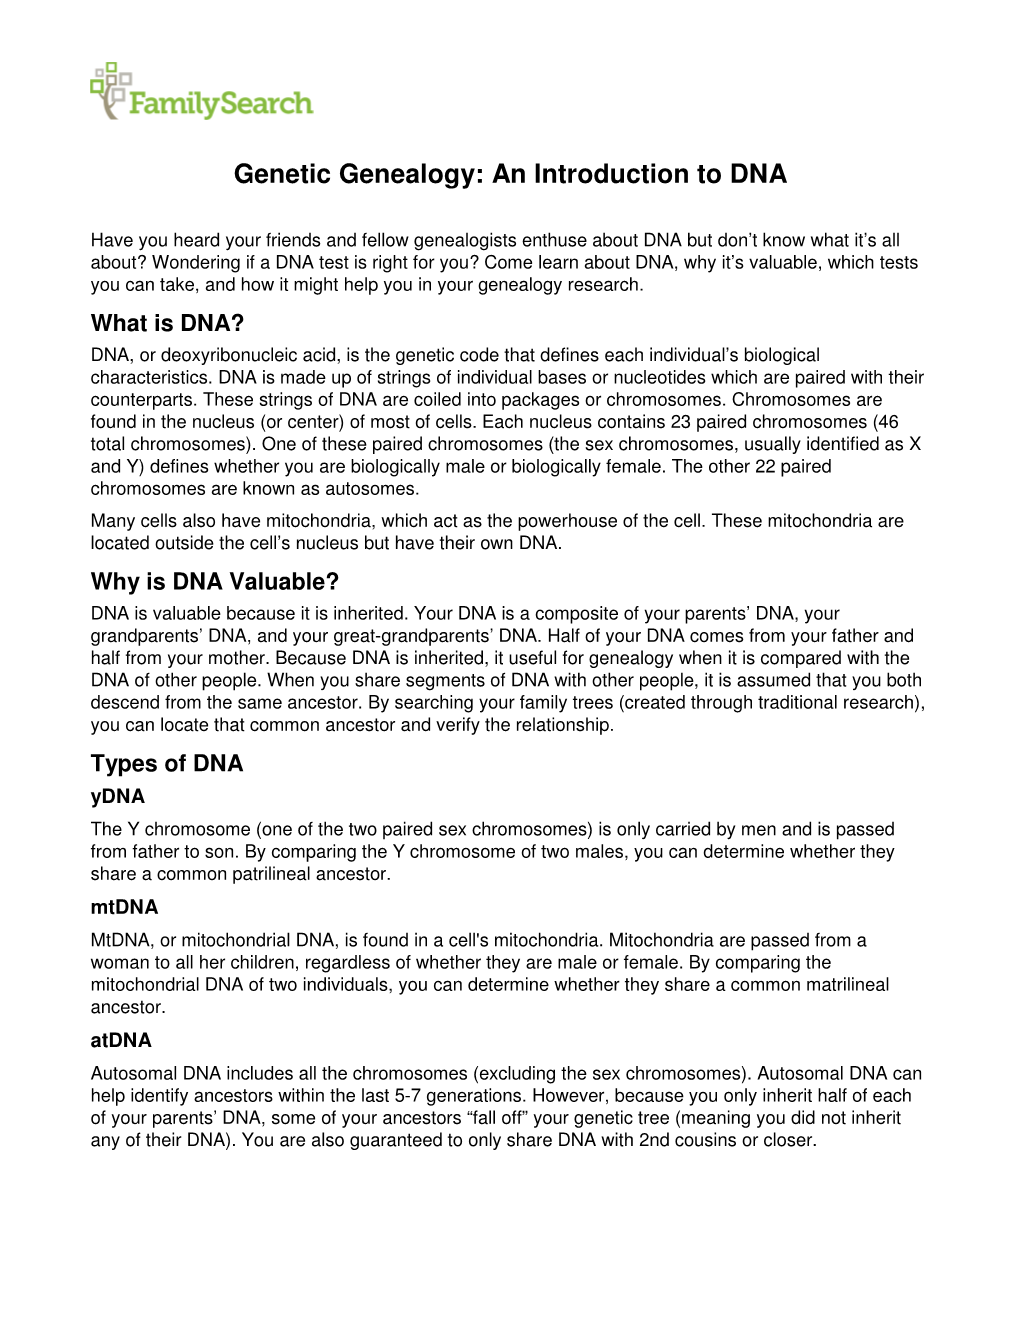 Genetic Genealogy: an Introduction to DNA